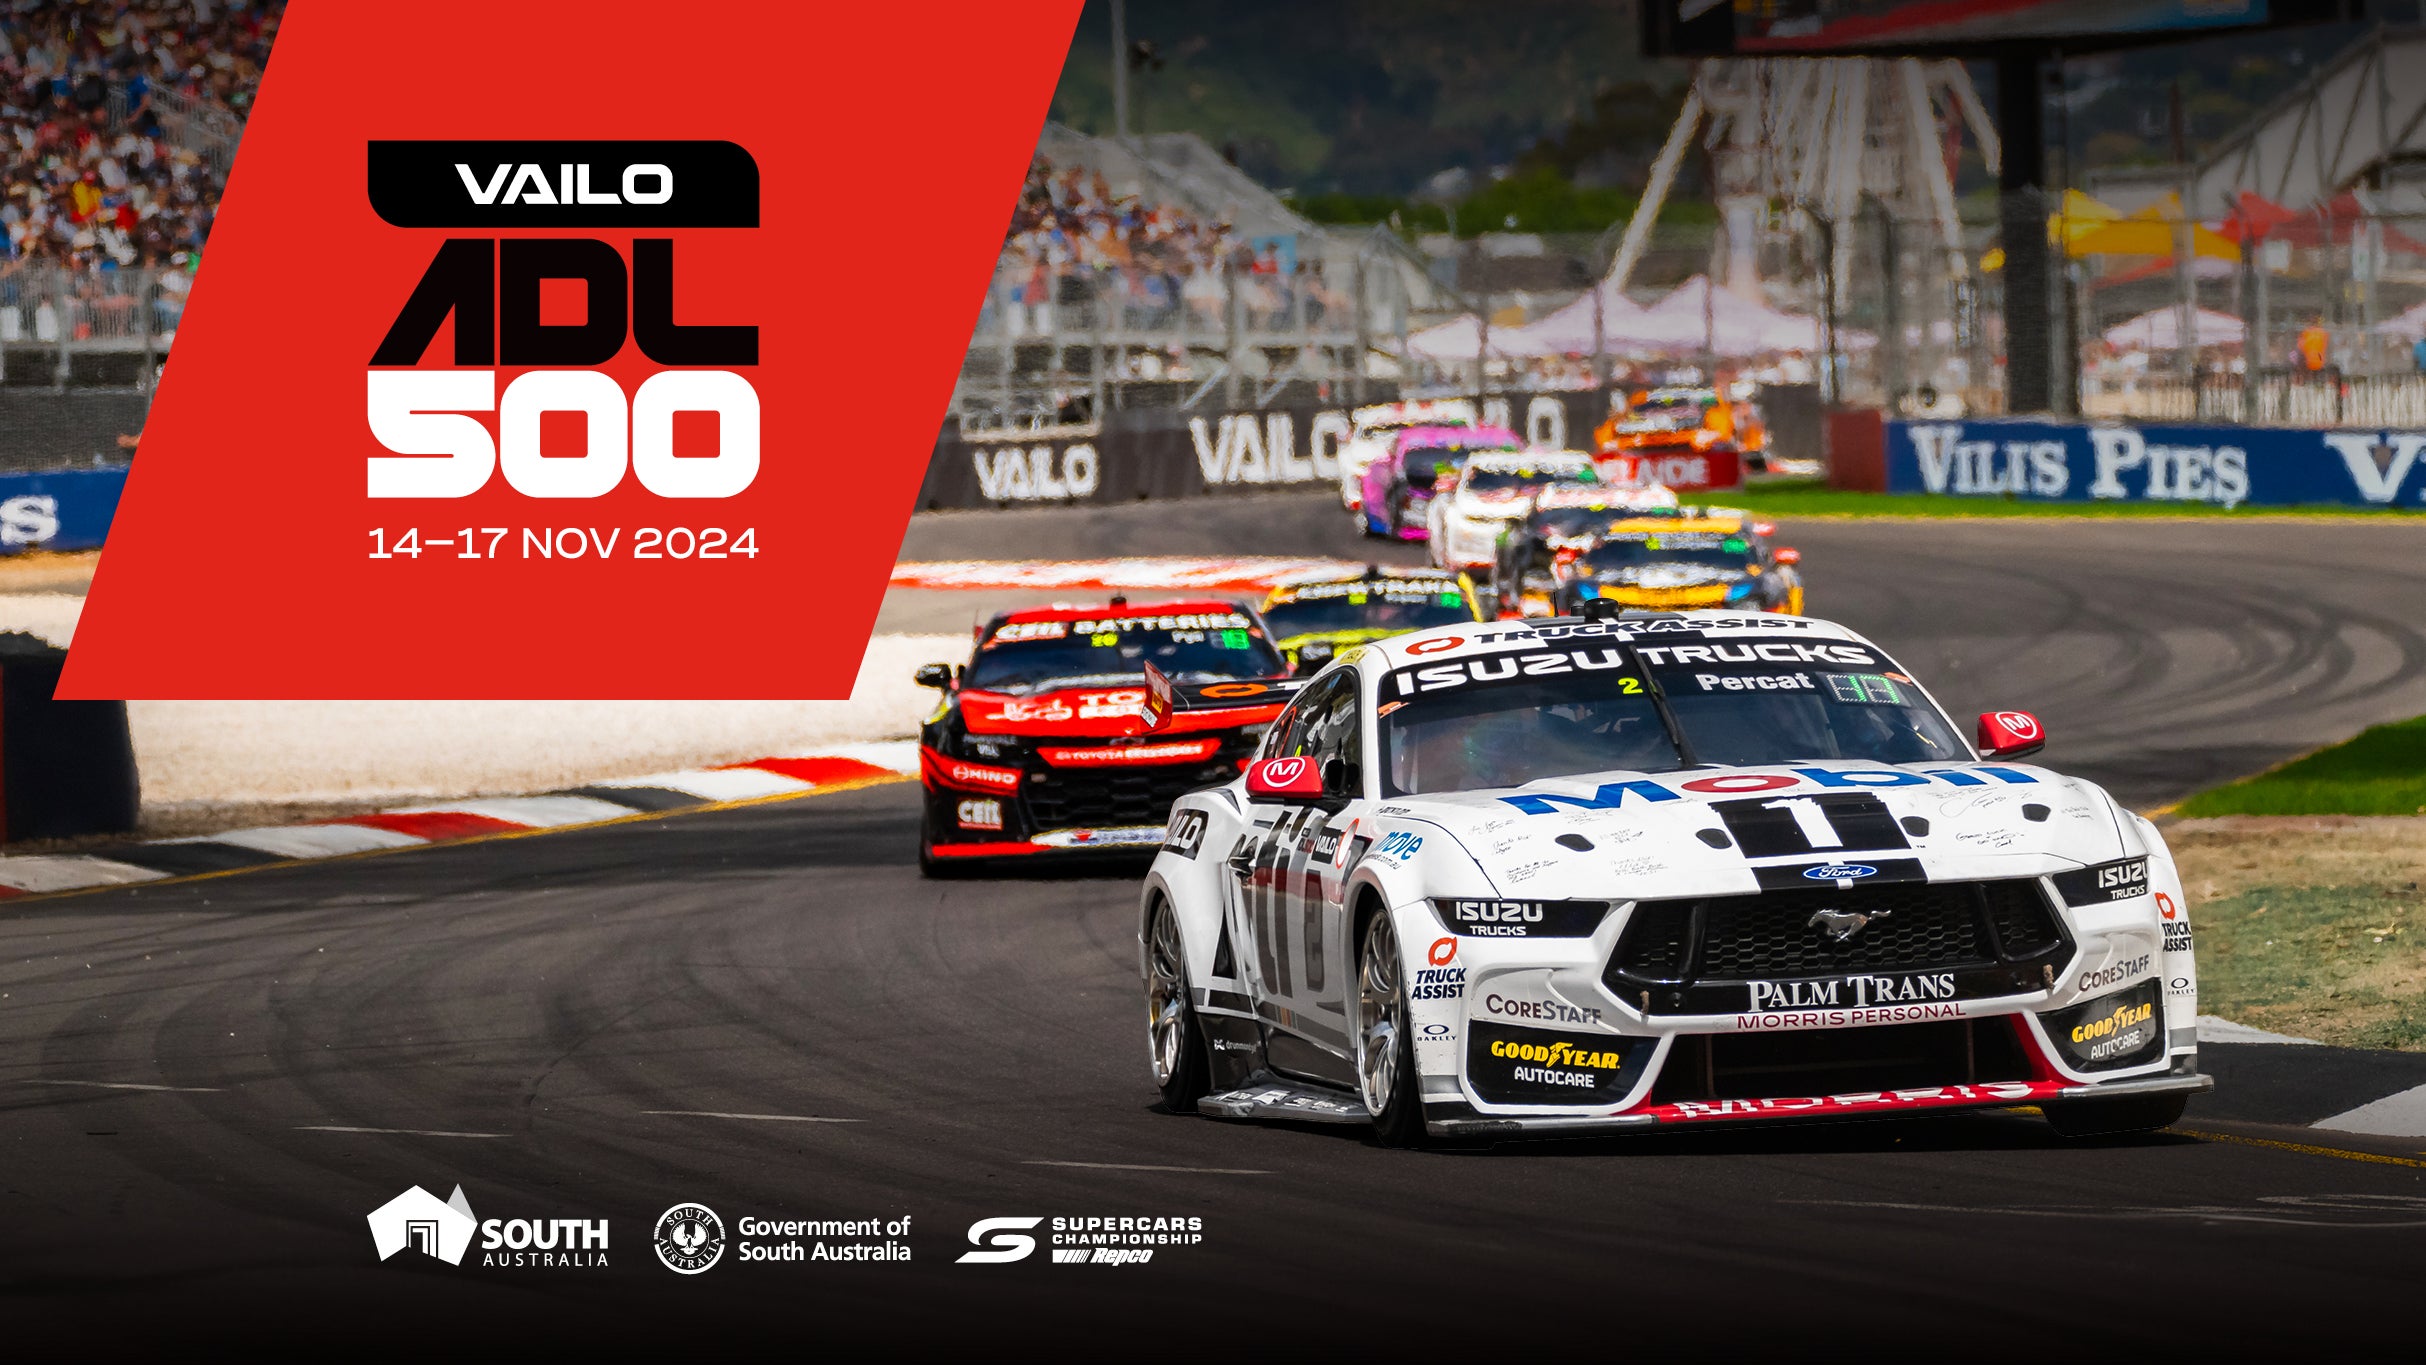 VAILO Adelaide 500 - Chicane Grandstand Friday Entry